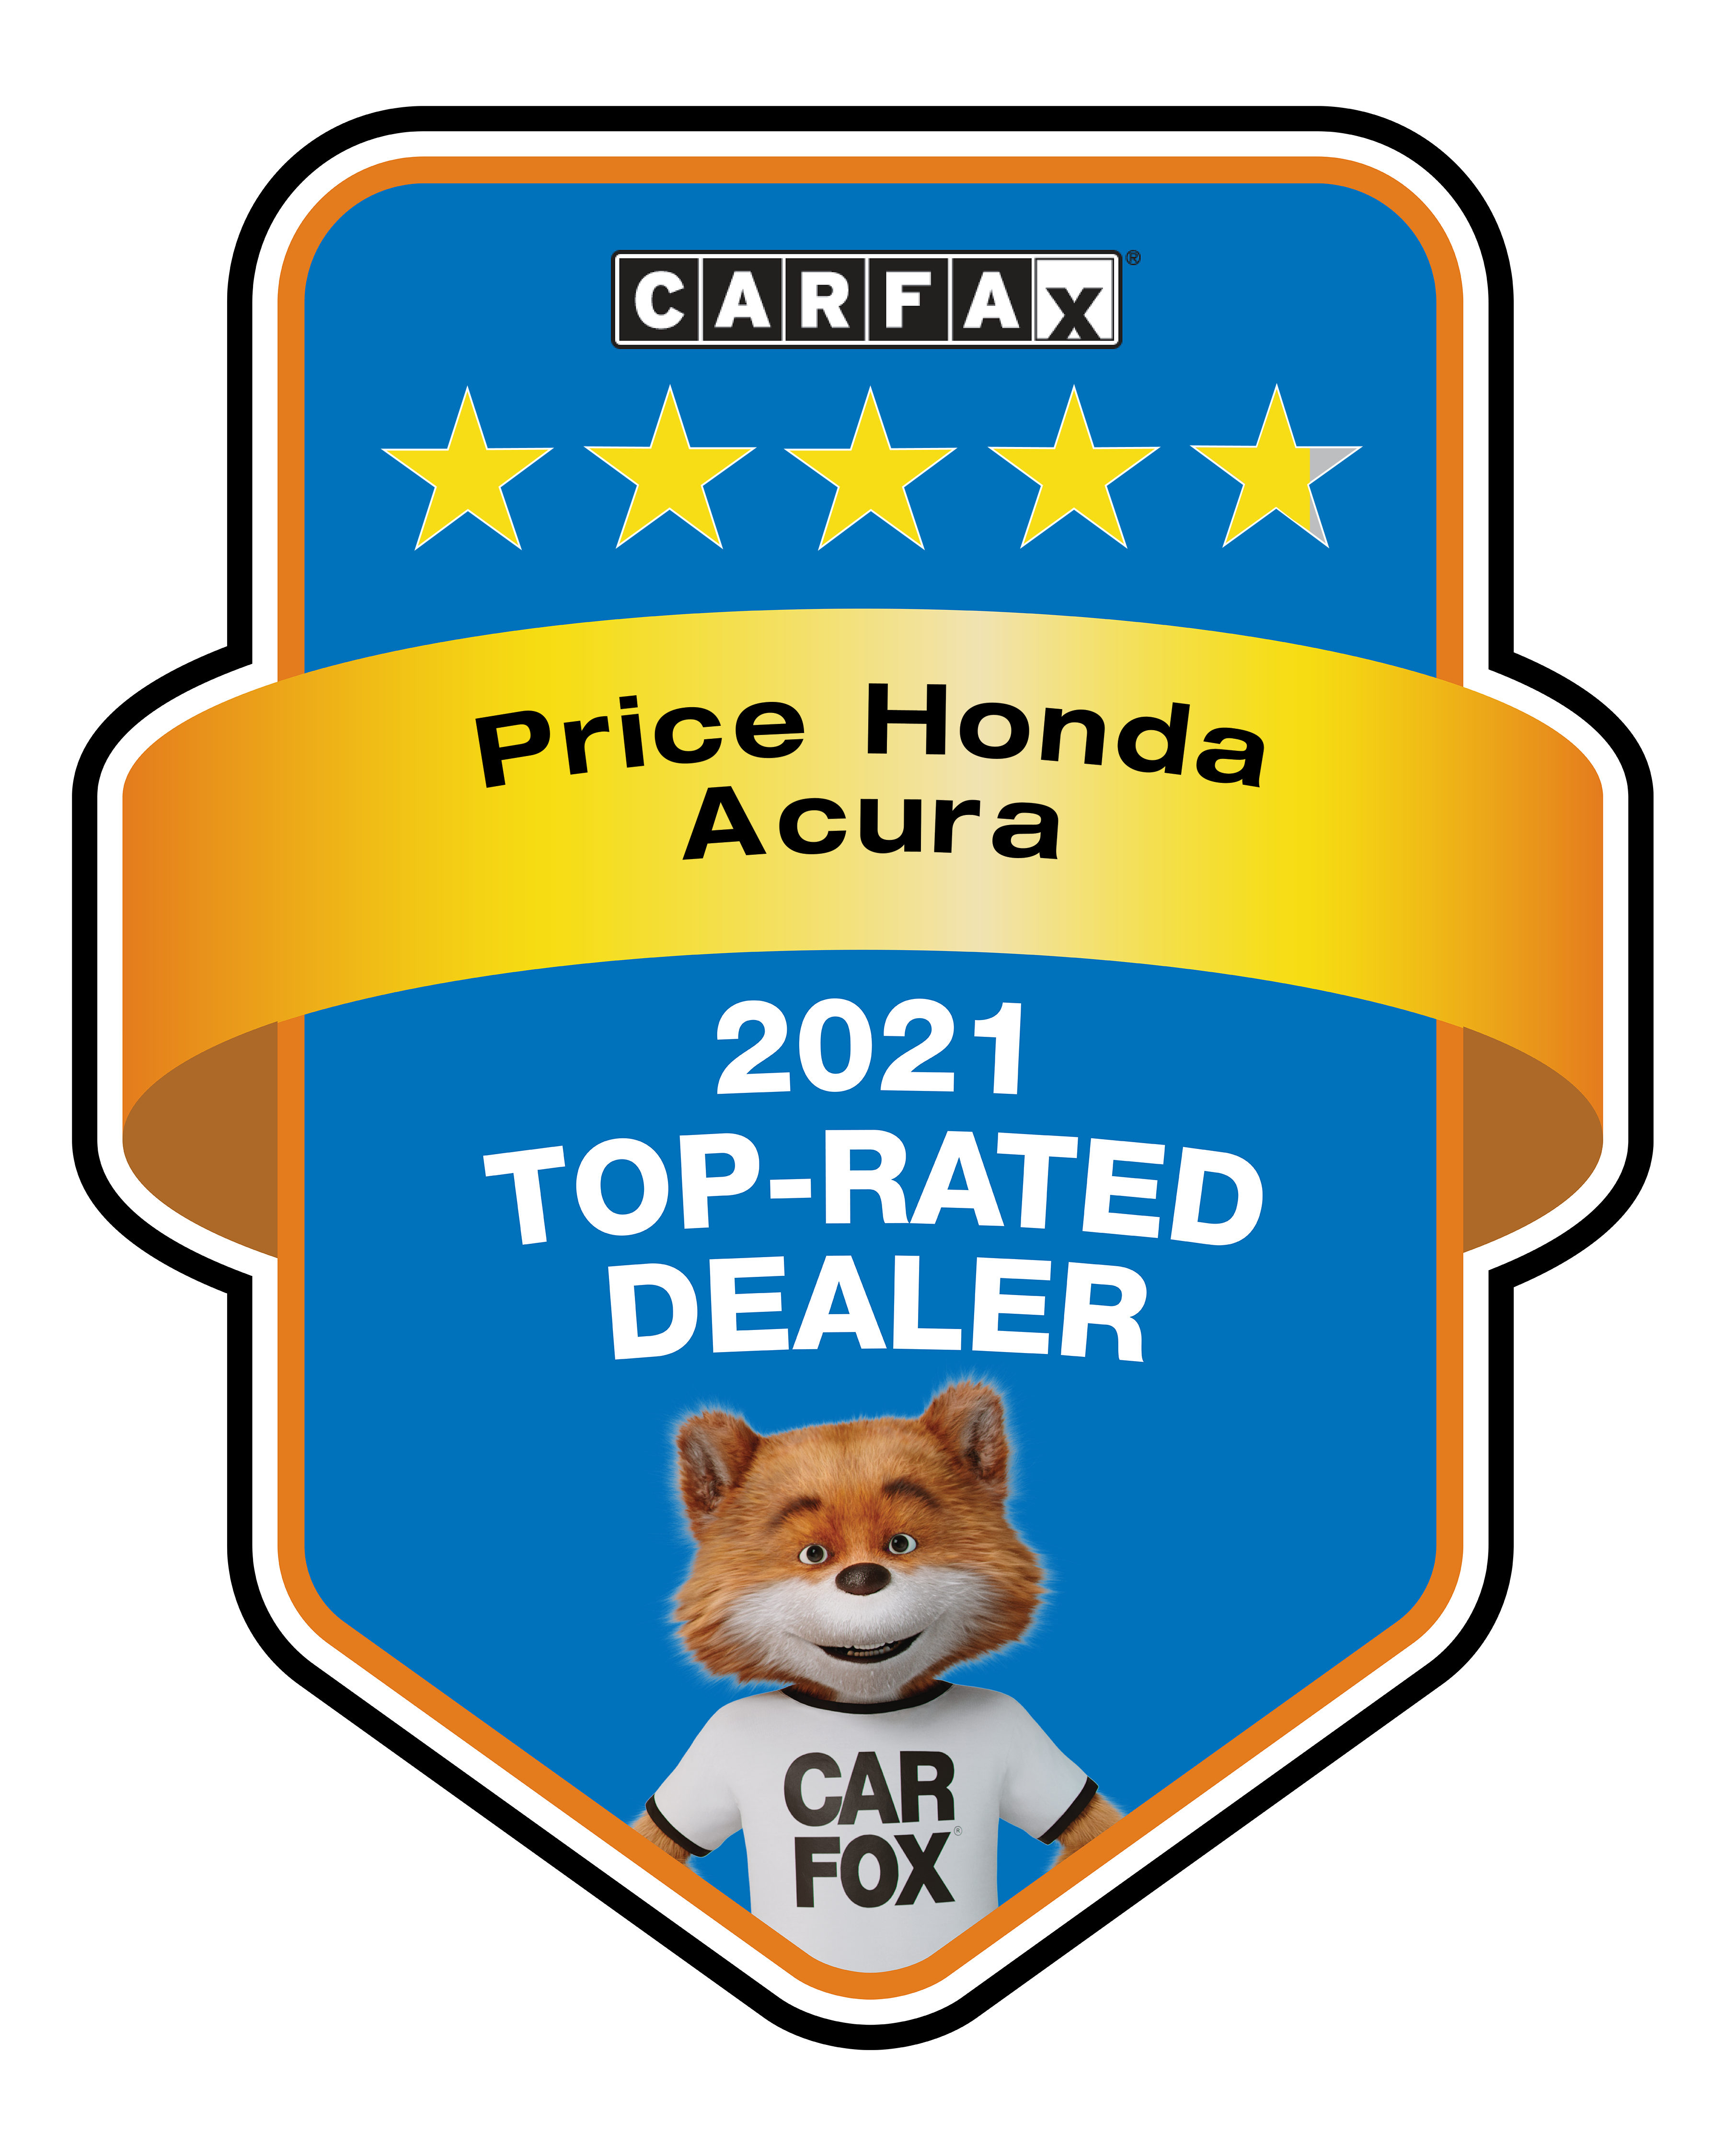 2021 Carfax Award for Used Cars and Service near Dover, DE, at Price Honda